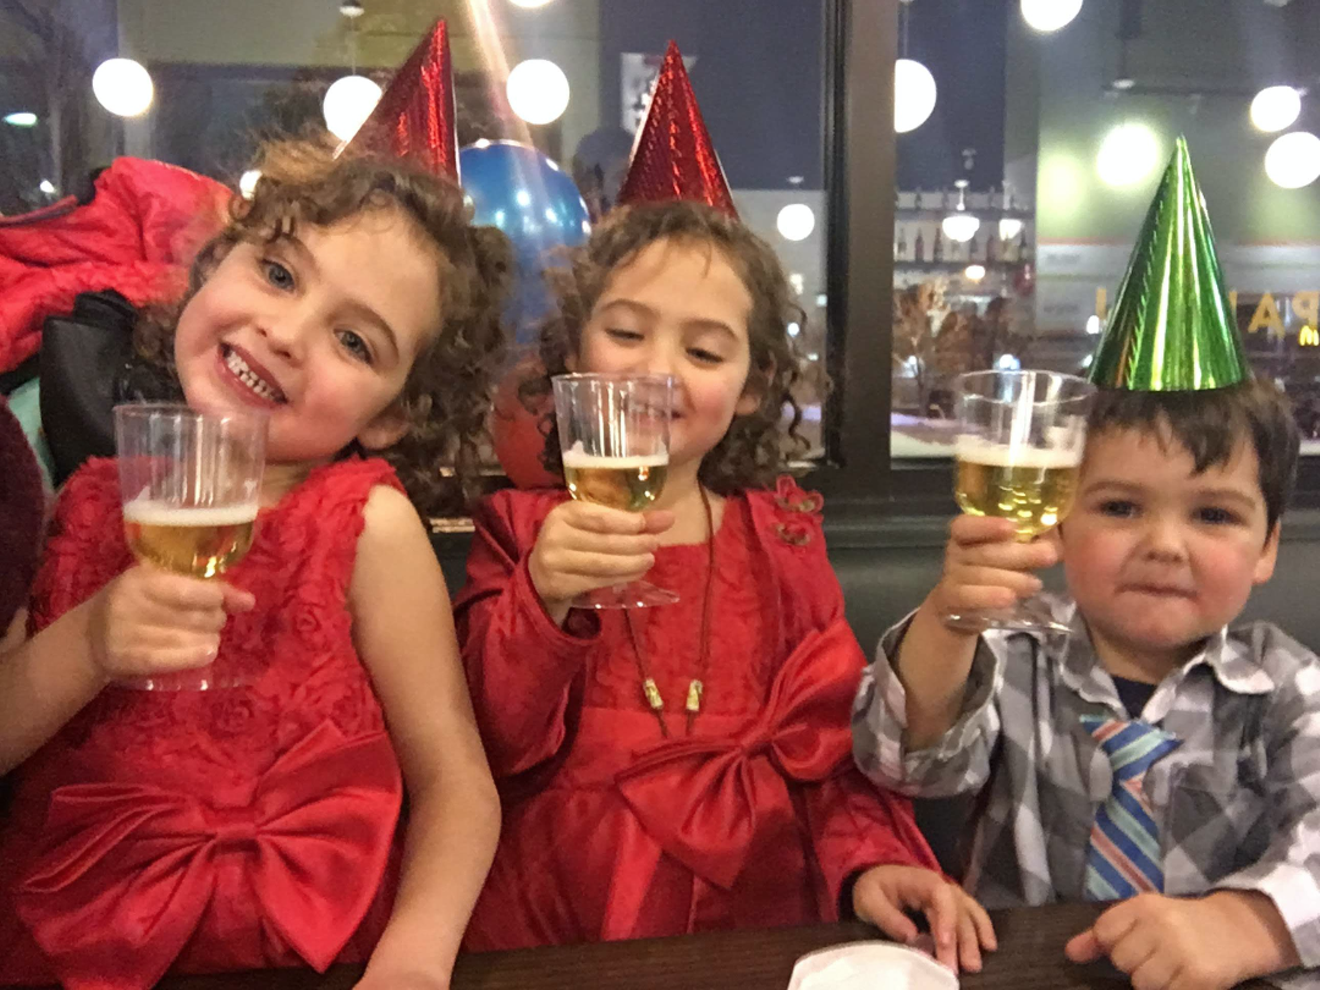 Kids celebrating New Year's Eve at Mici.